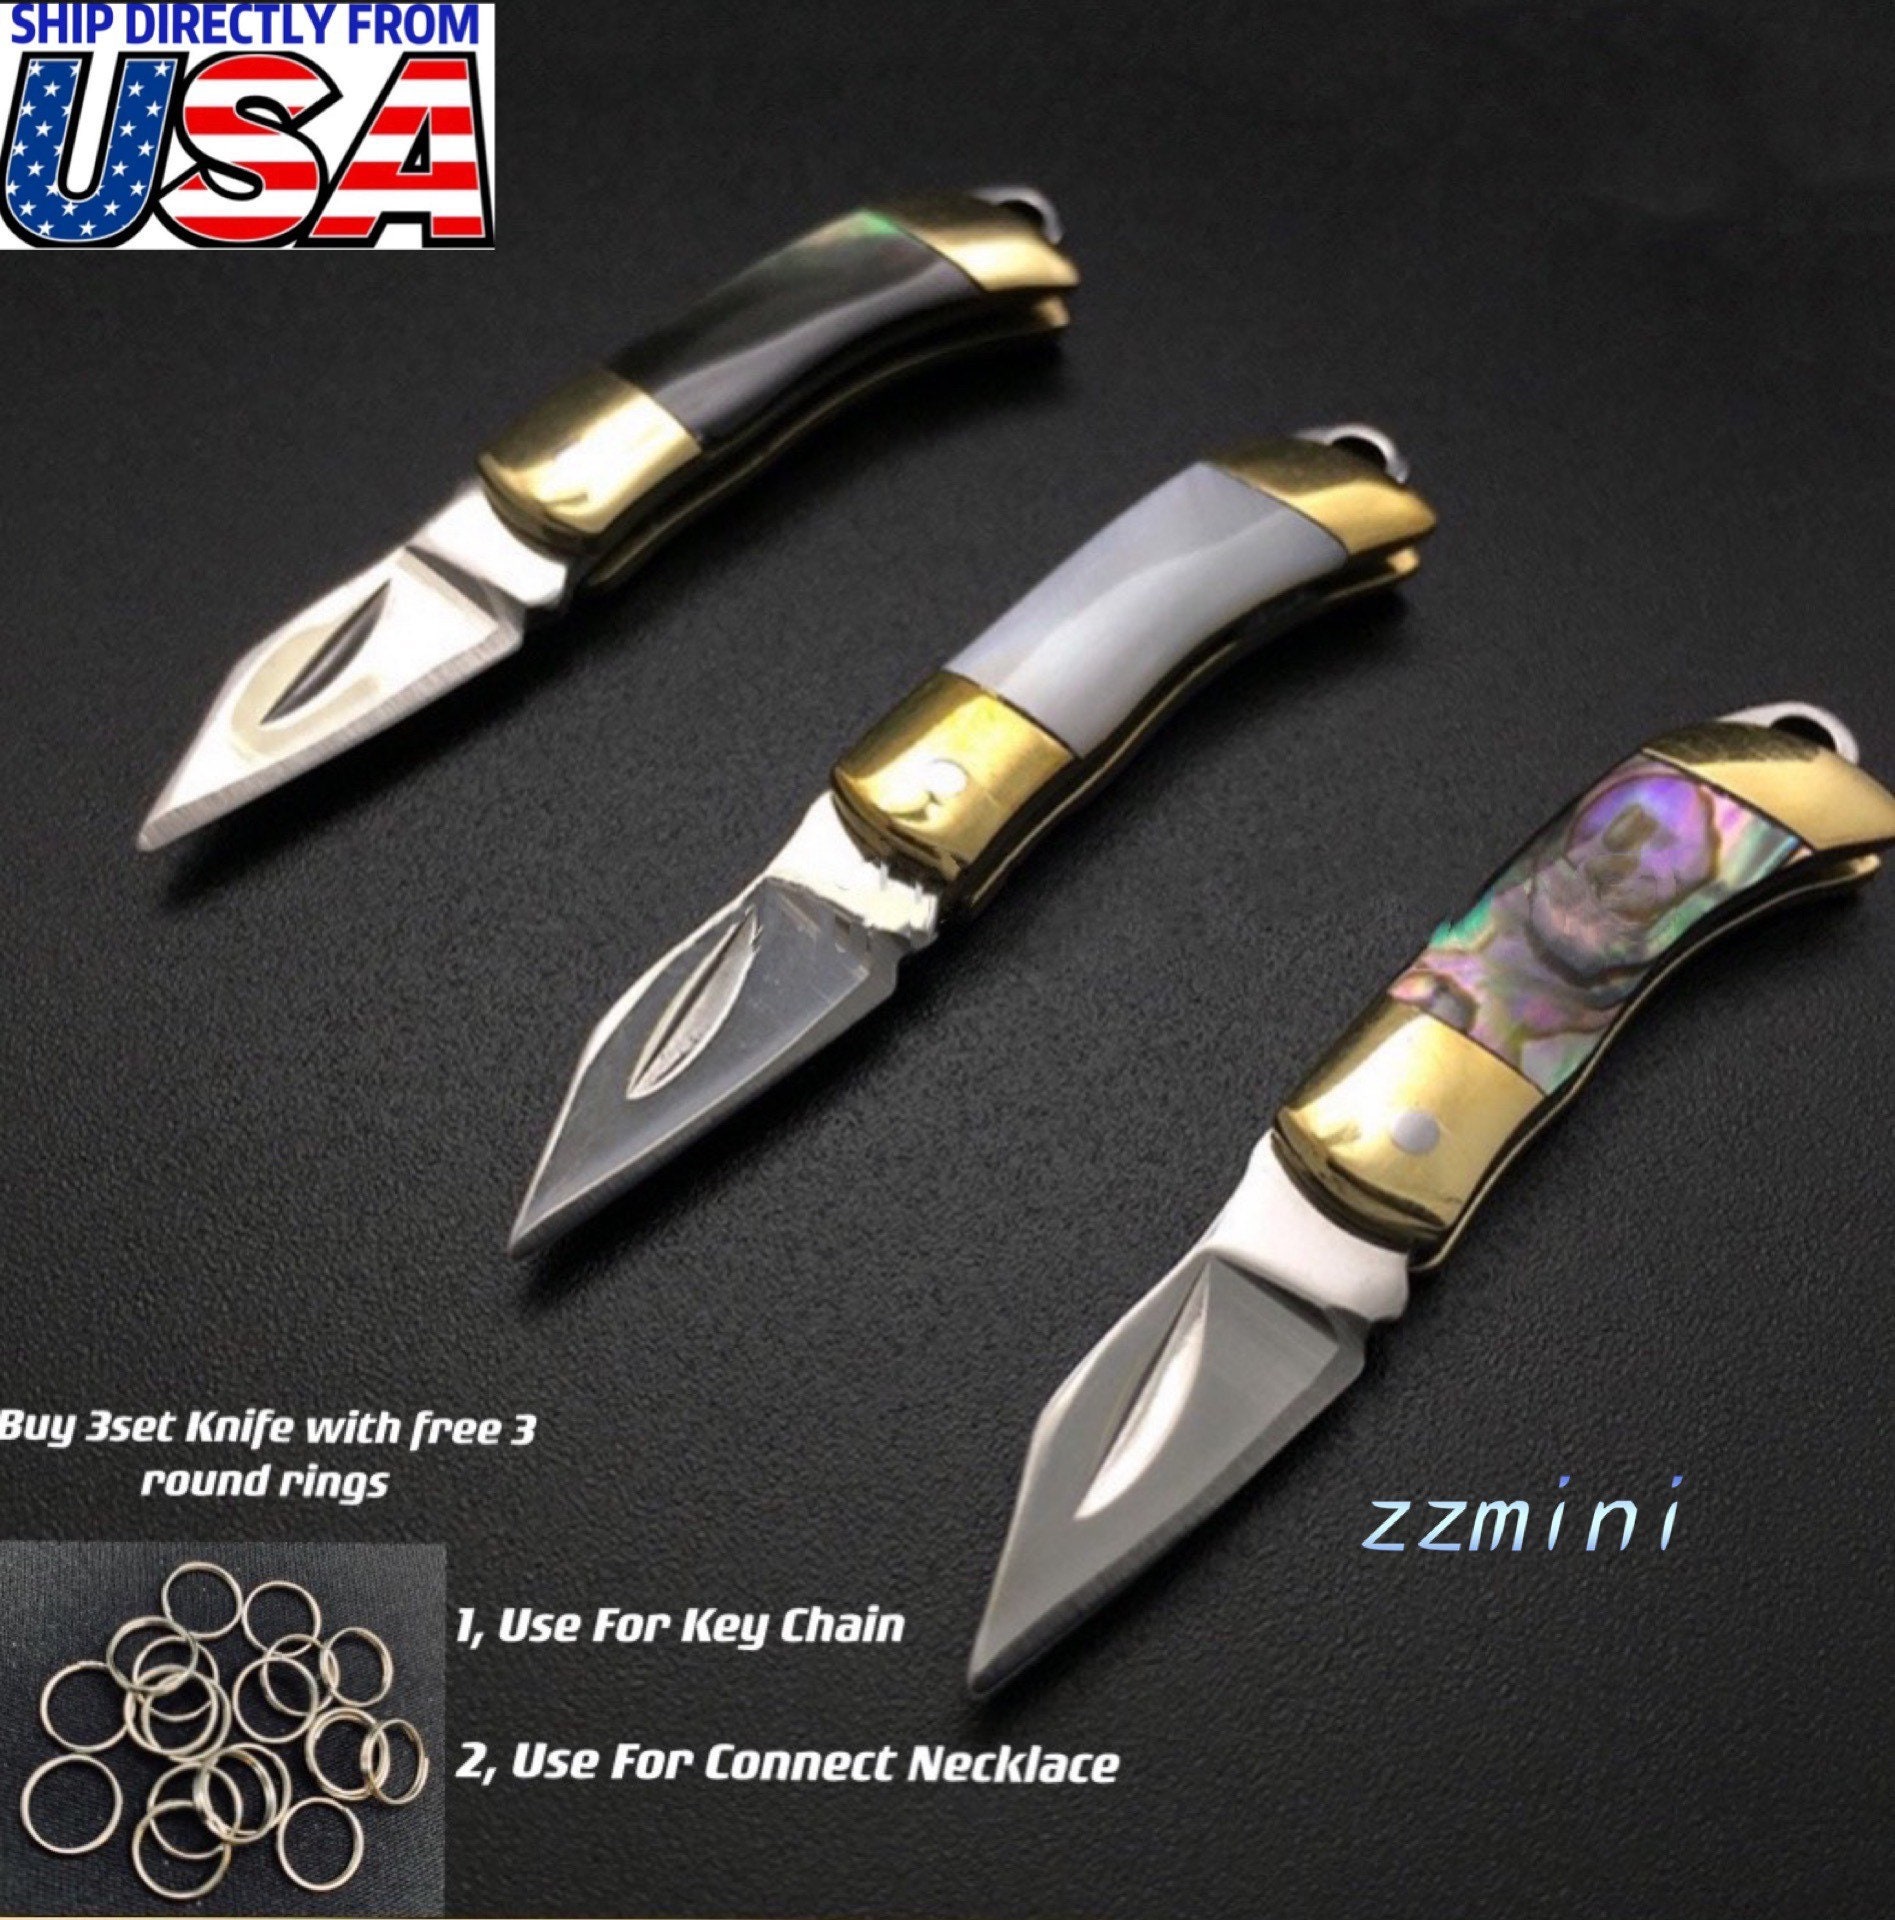 Deluxe Craft Knife Precision Cutter Hobby Knife Blades Set For Art Work,  Scrapbooking,stencil,architecture Modeling,leather Work - Knife - AliExpress